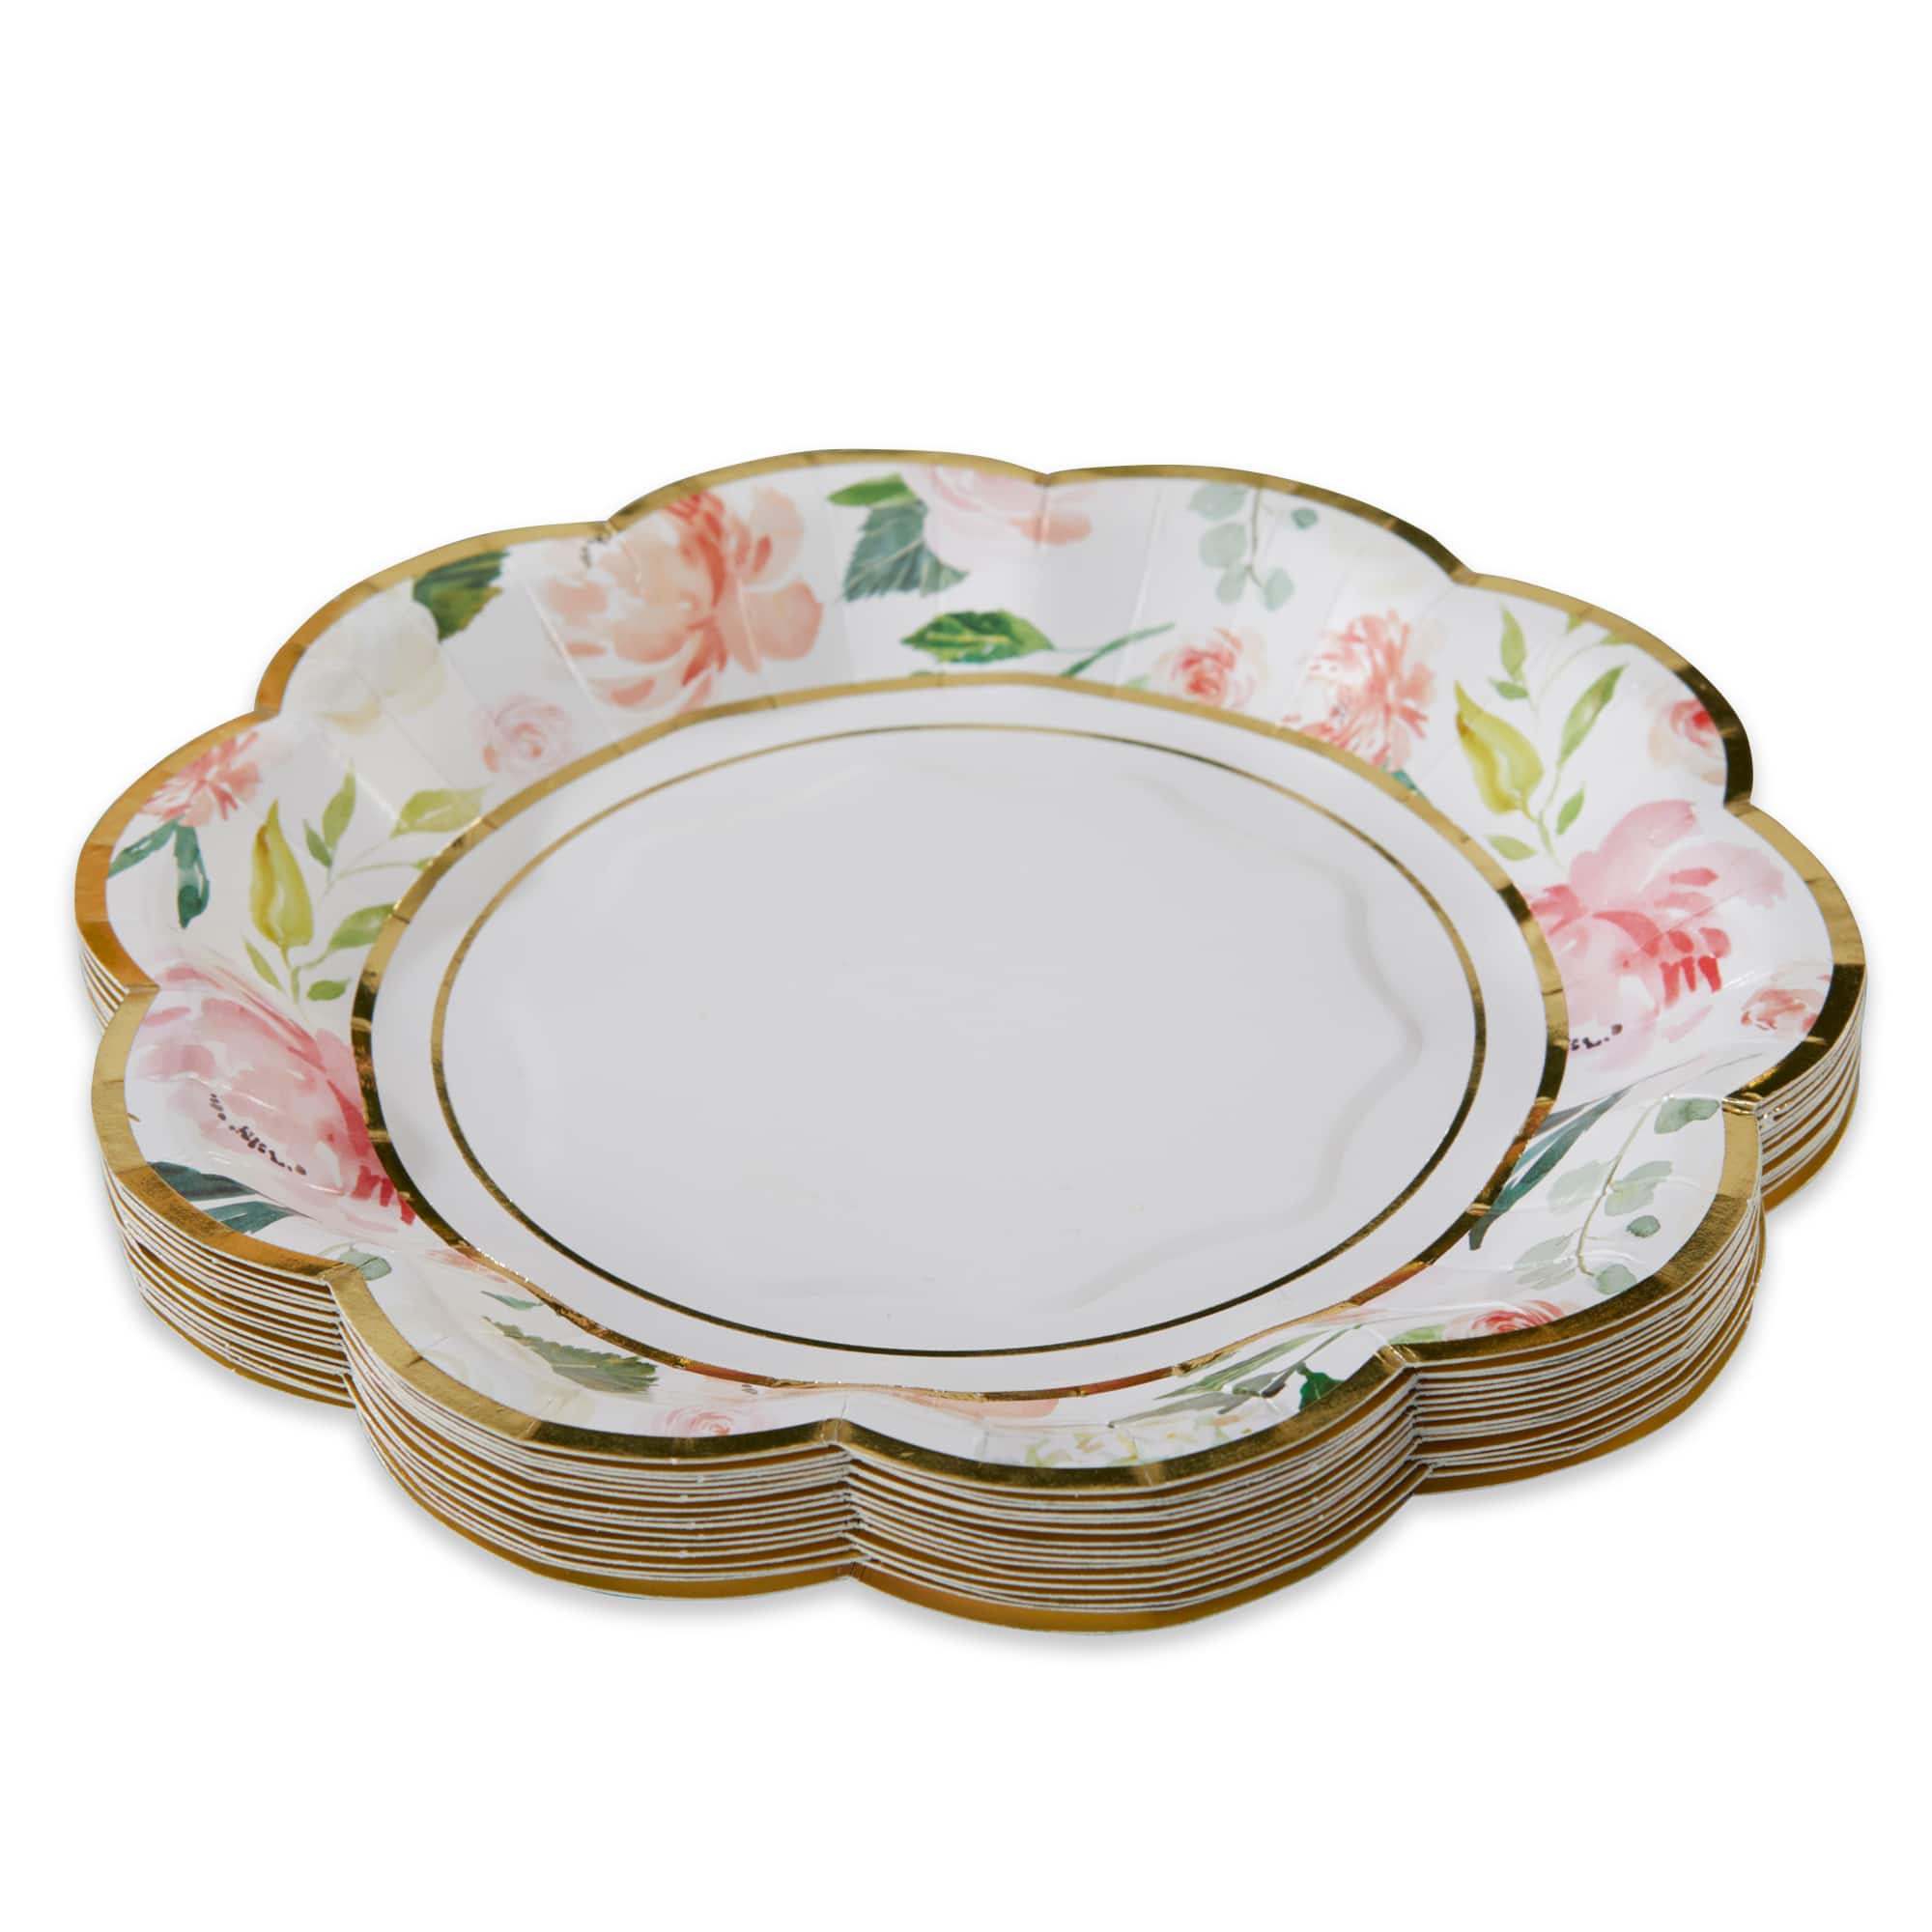 50 Piece 25 Guests Set Clear Plastic Disposable Dinner Plate Sets